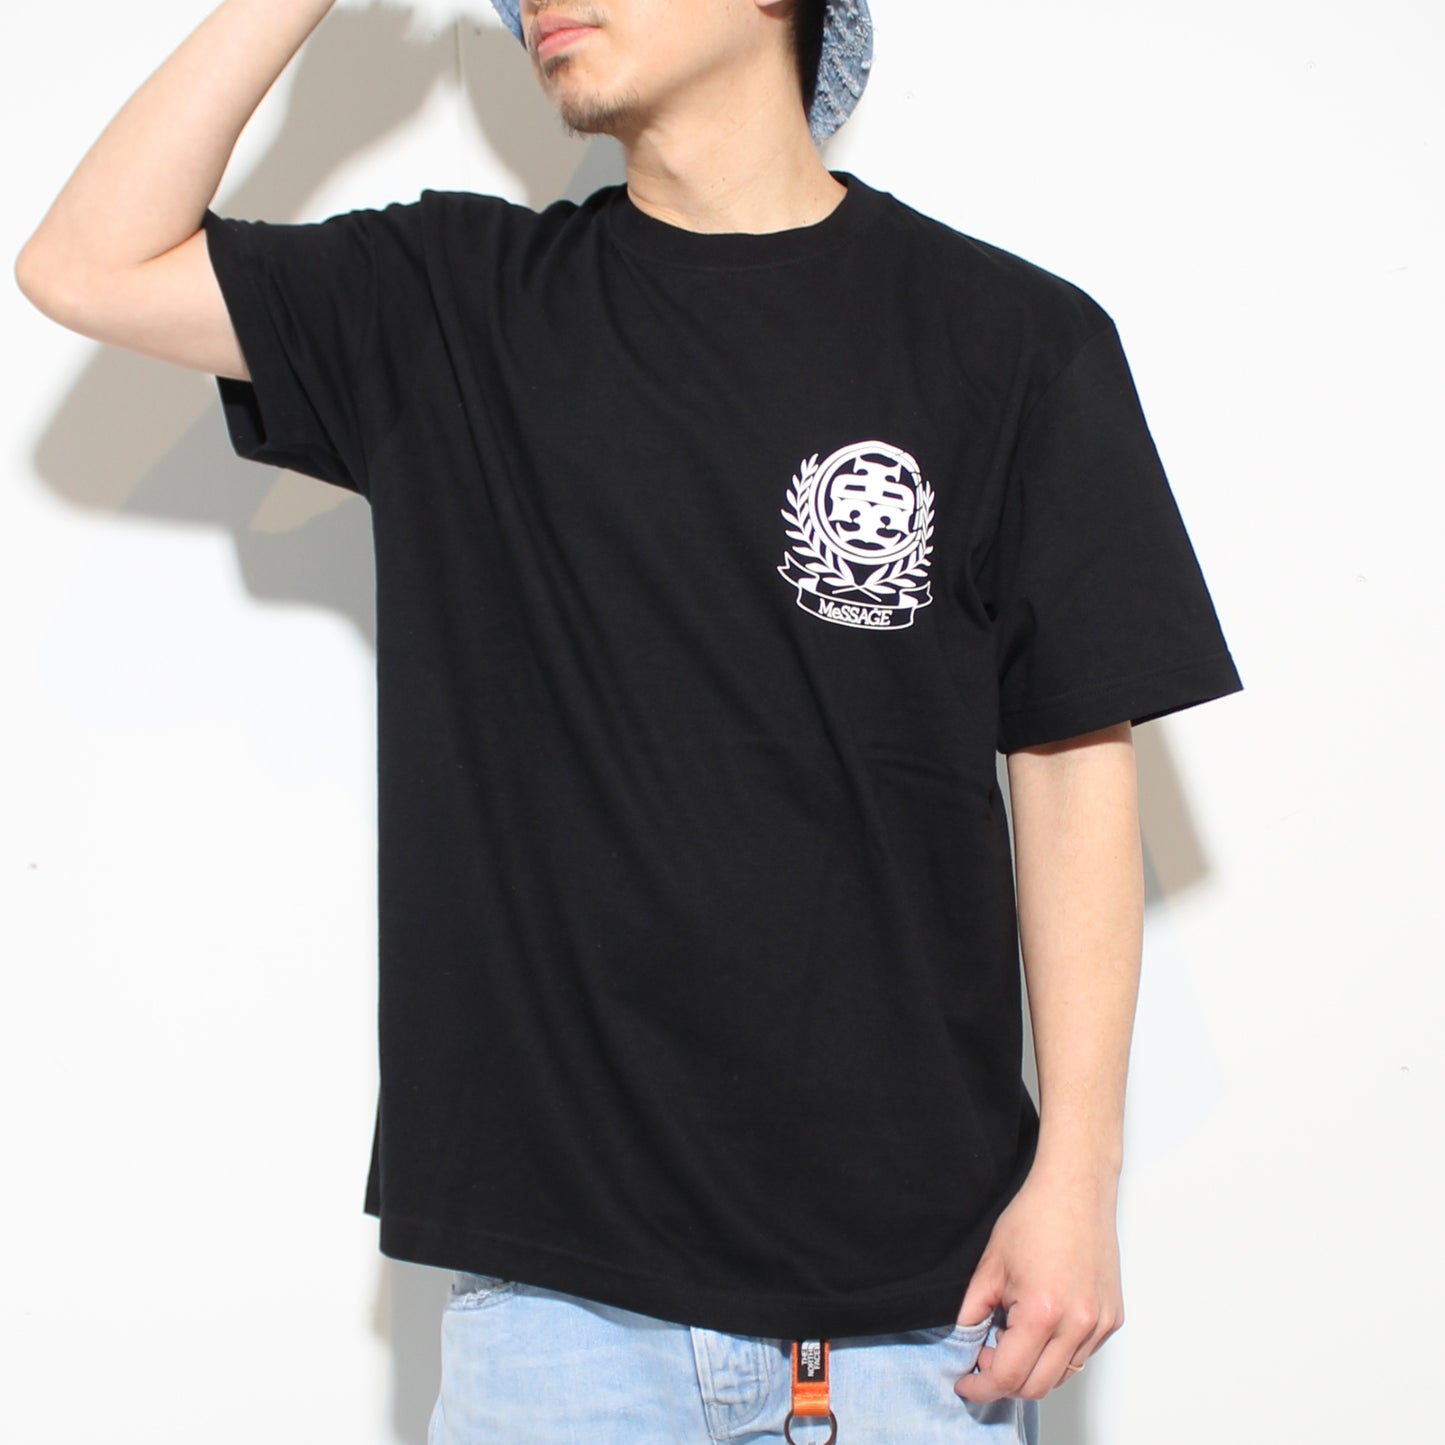 【Me'SSAGE】Gloly Eagle S/S